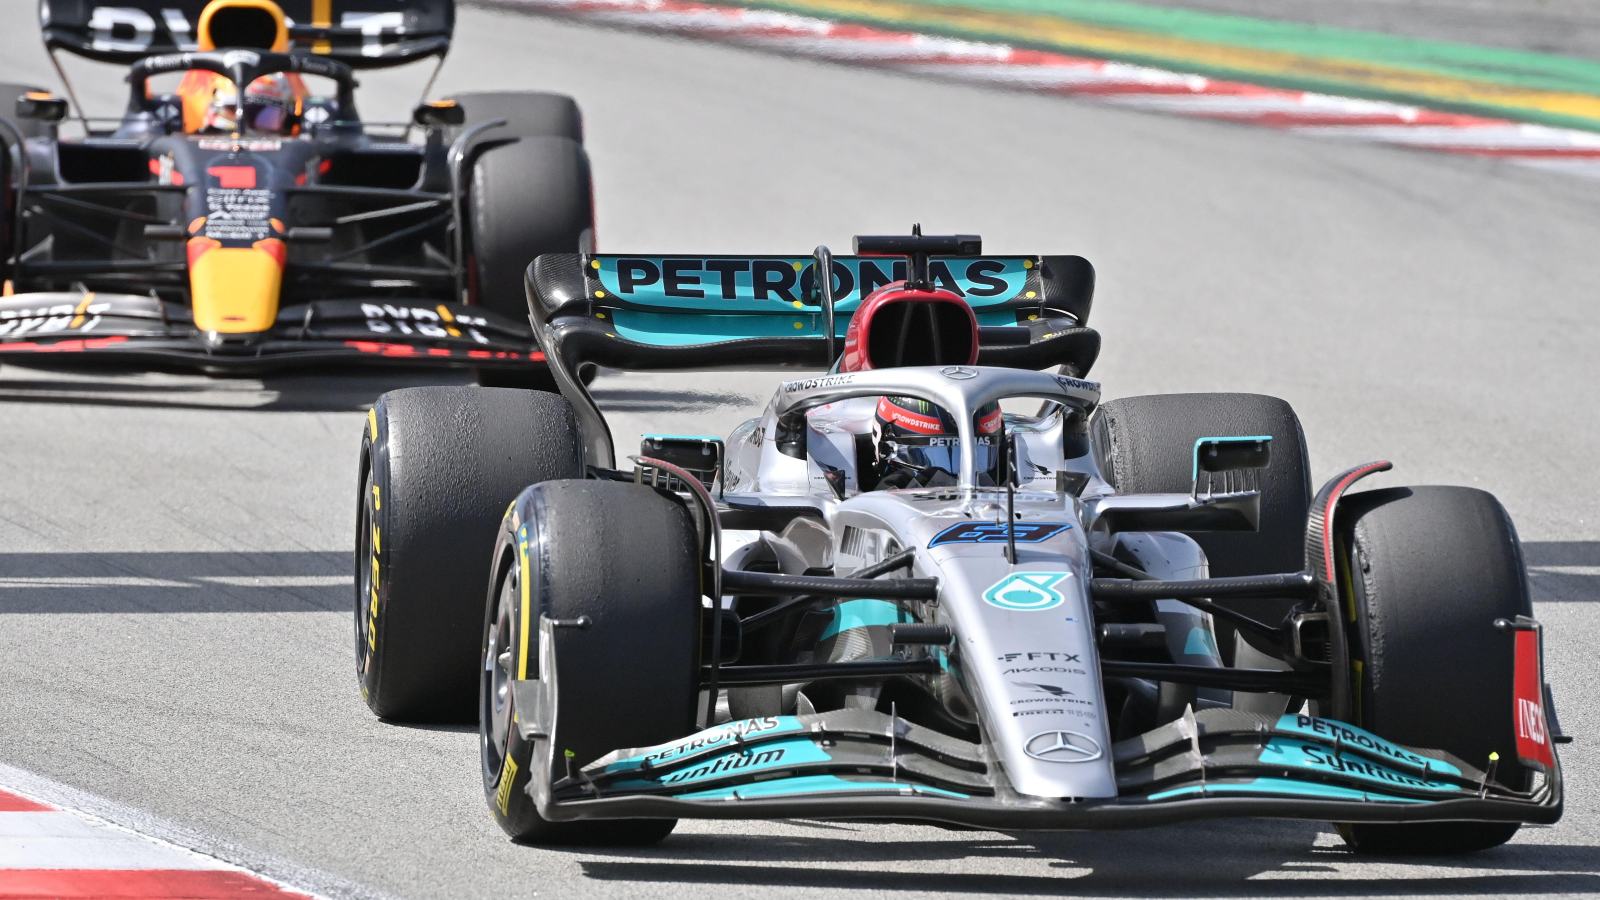 Mercedes driver George Russell defending against Max Verstappen. Barcelona, May 2022.